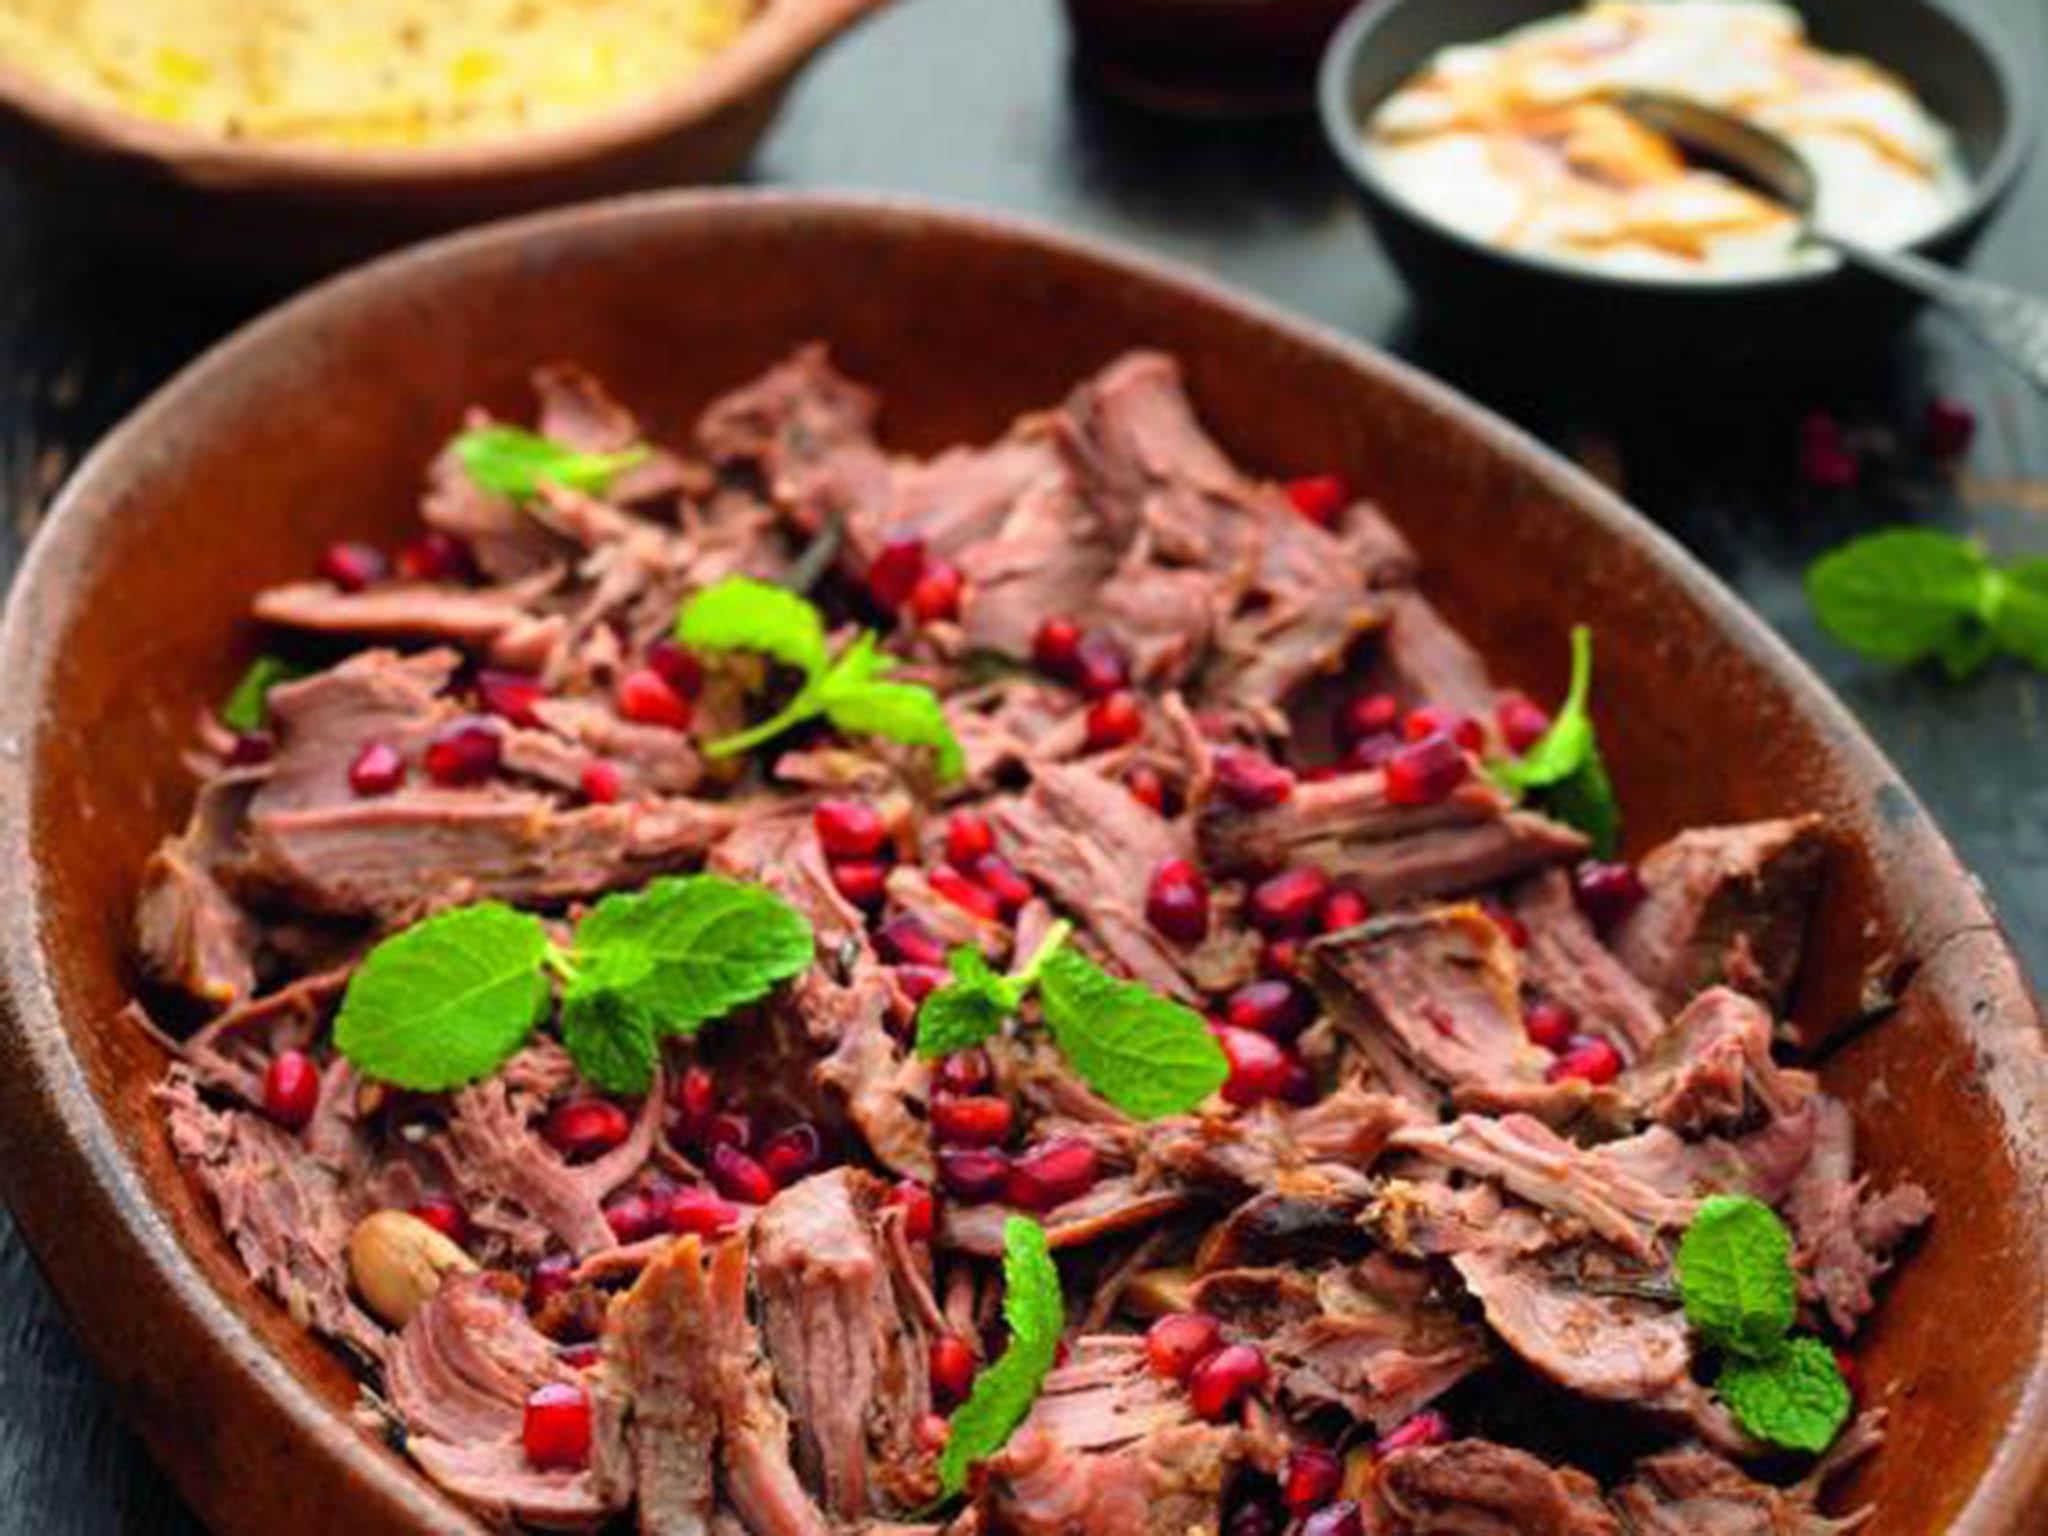 Pomegranate seeds and molasses give a sweet edge to this tasty meal